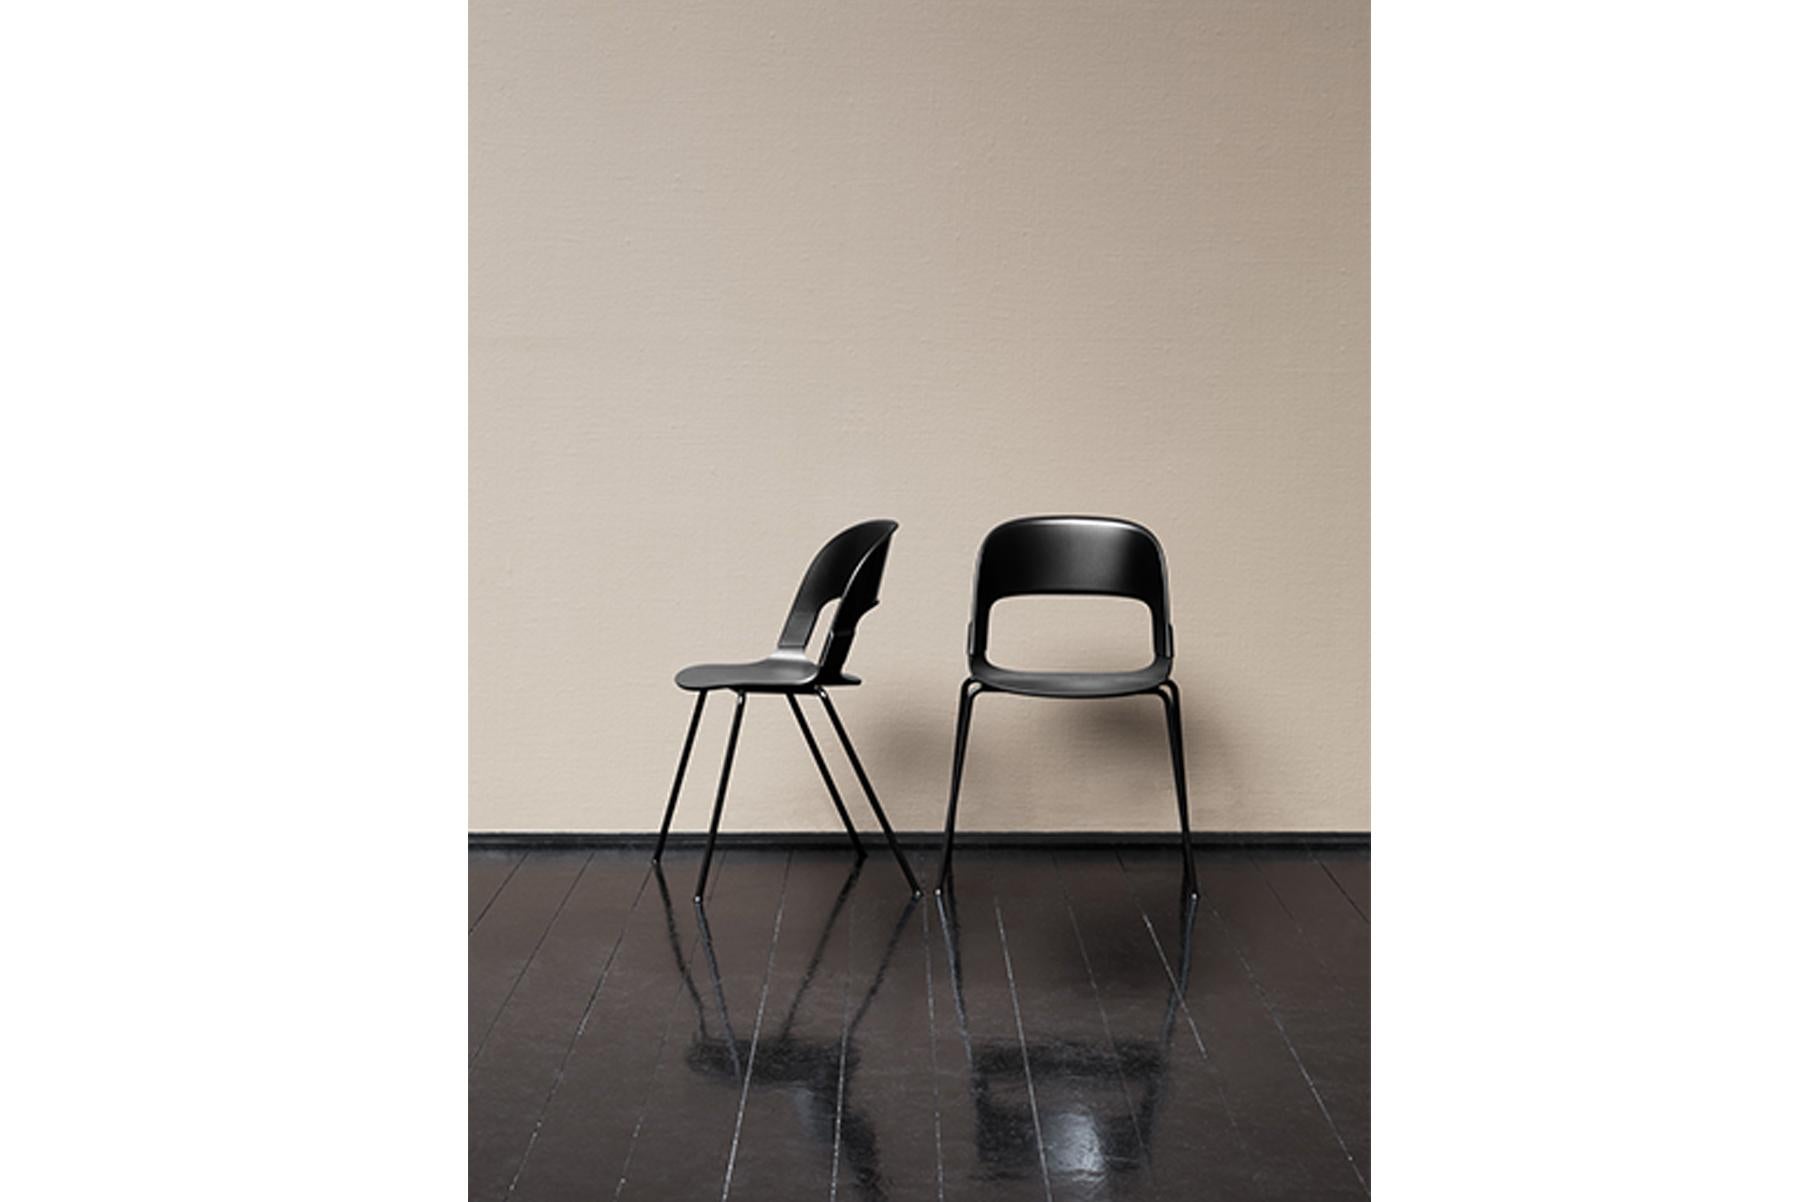 The PAIR chair is a tale of materials, textures, light and colour. You can customise the different elements and mix & match the different colours and materials. This opens up for endless combinations. PAIR is designed by Benjamin Hubert for Fritz